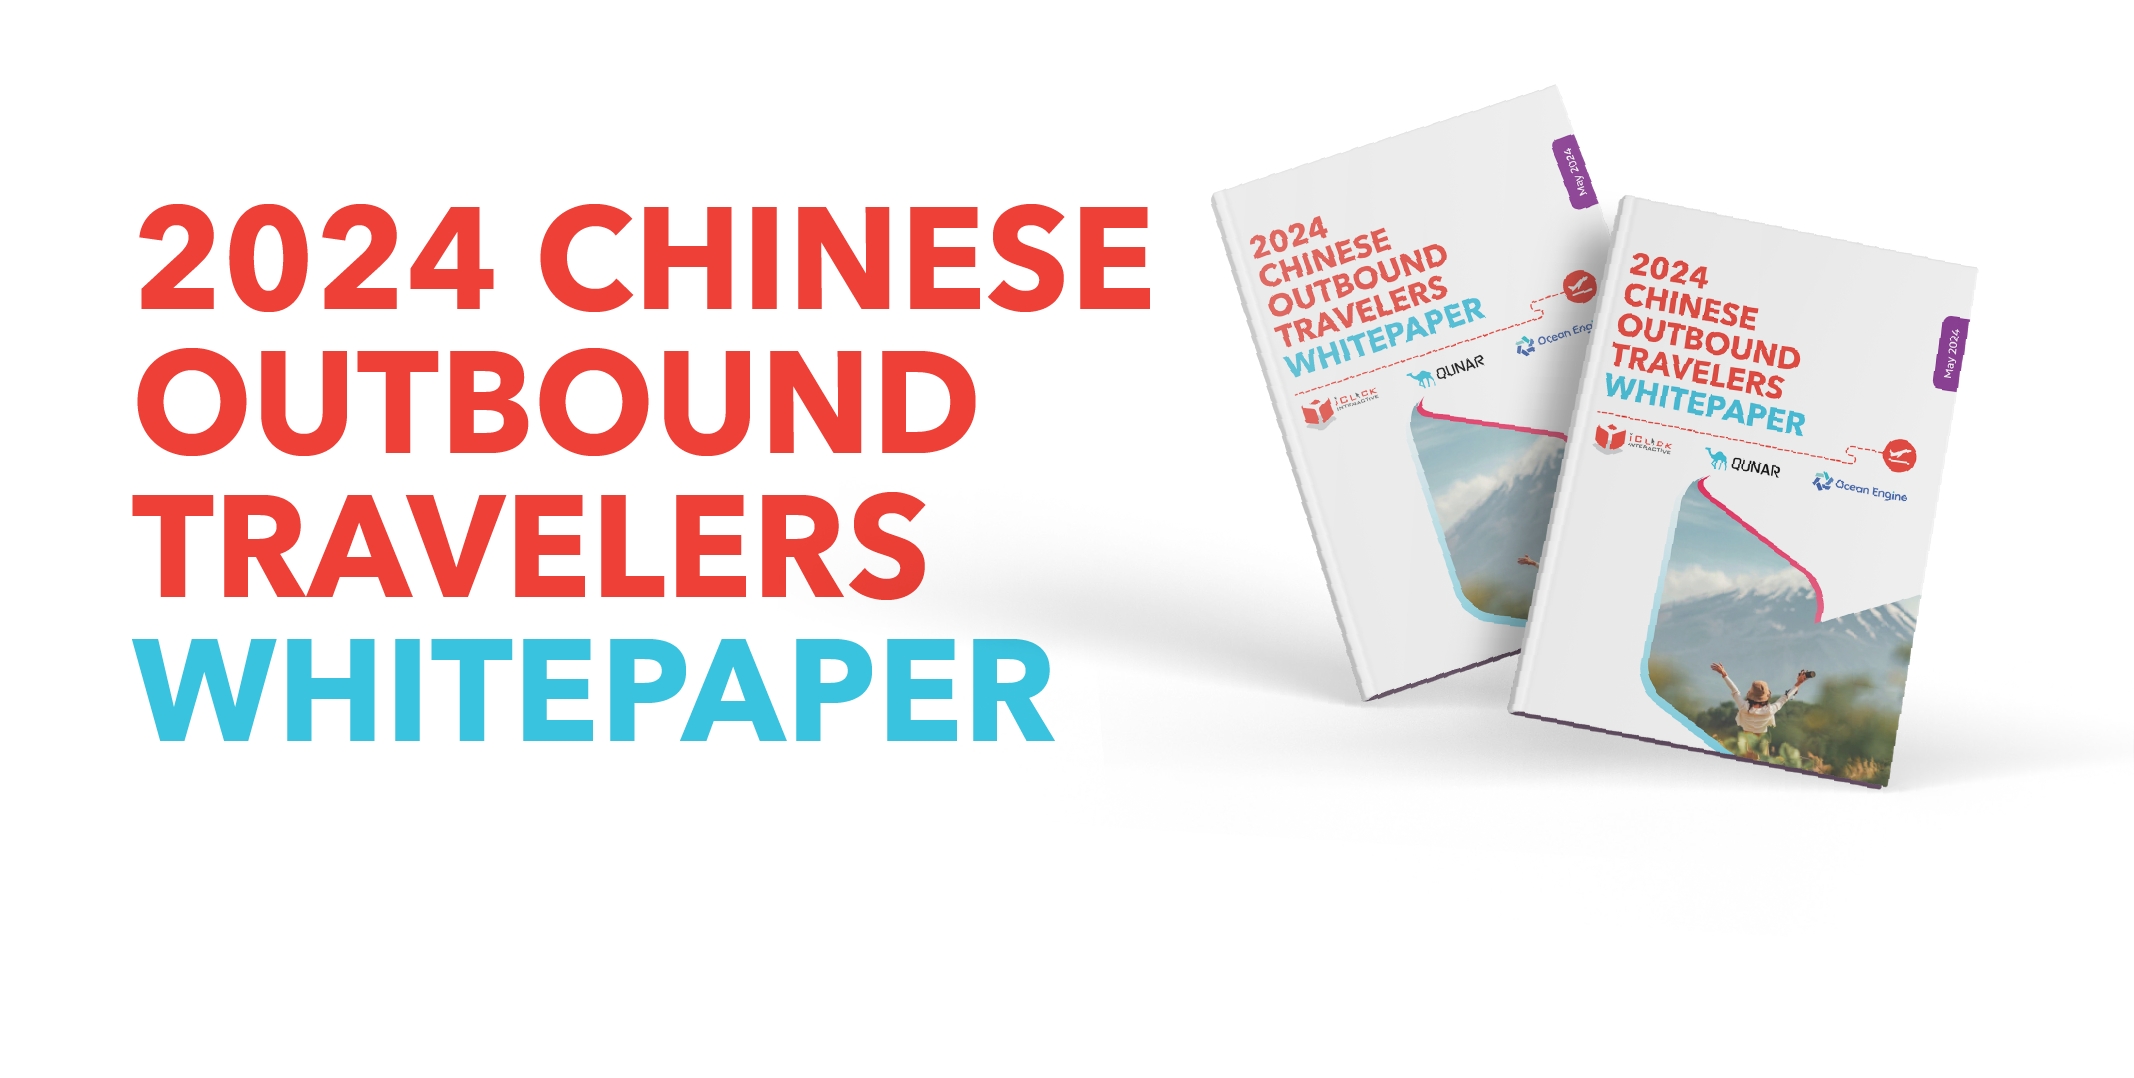 2024 Chinese Outbound Travelers Whitepaper